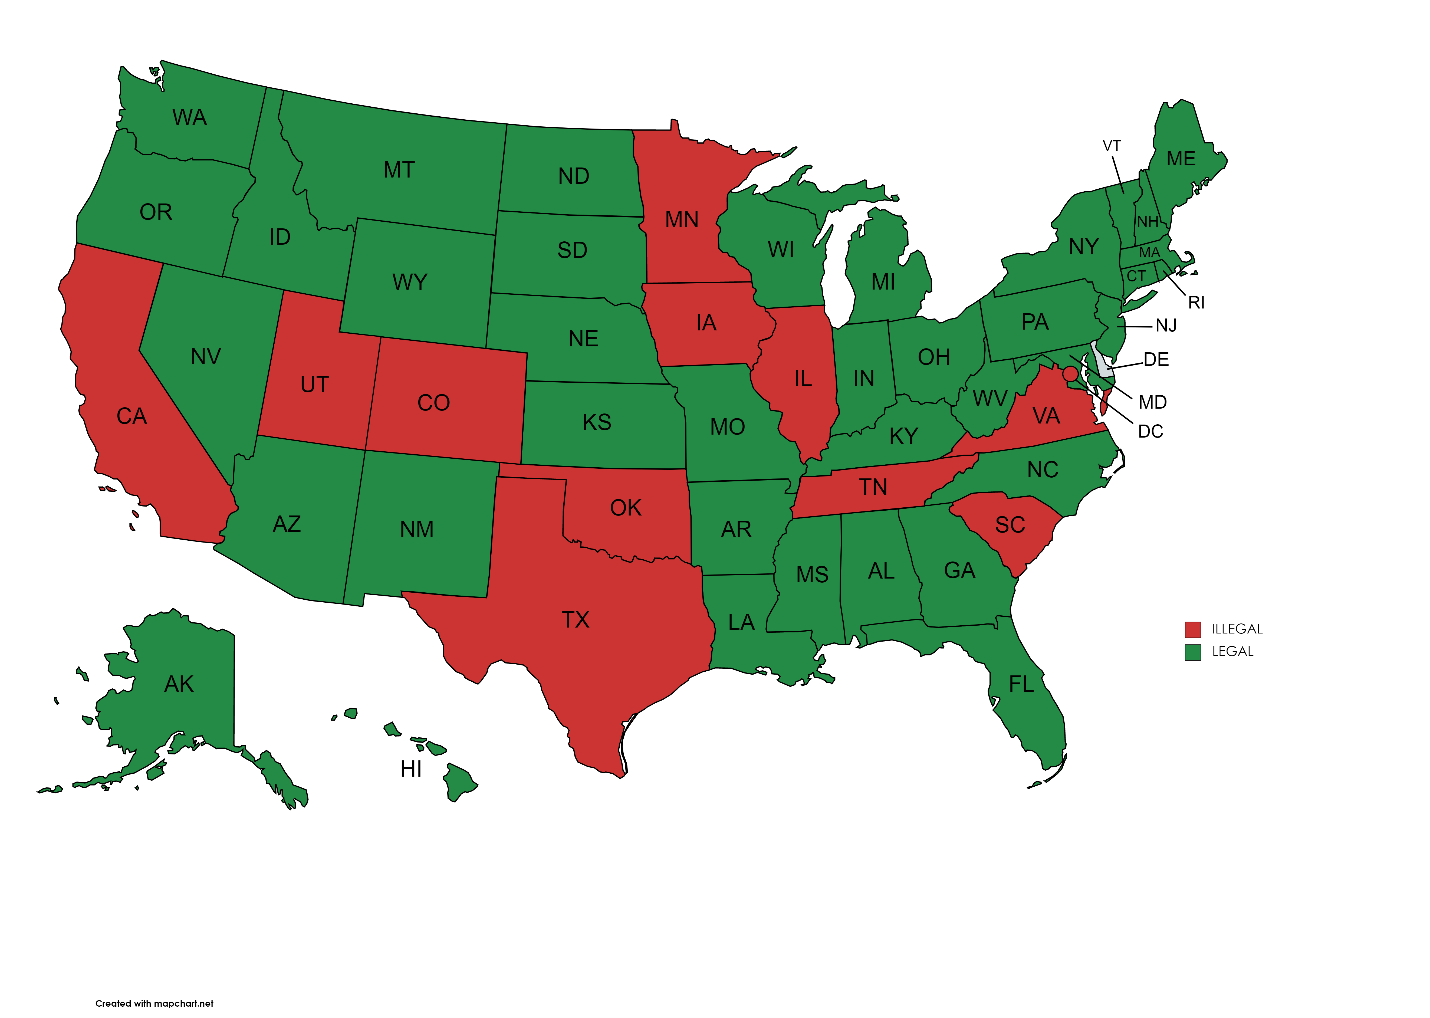 Map with states where Laser Jammers are illegal in red, legal in green